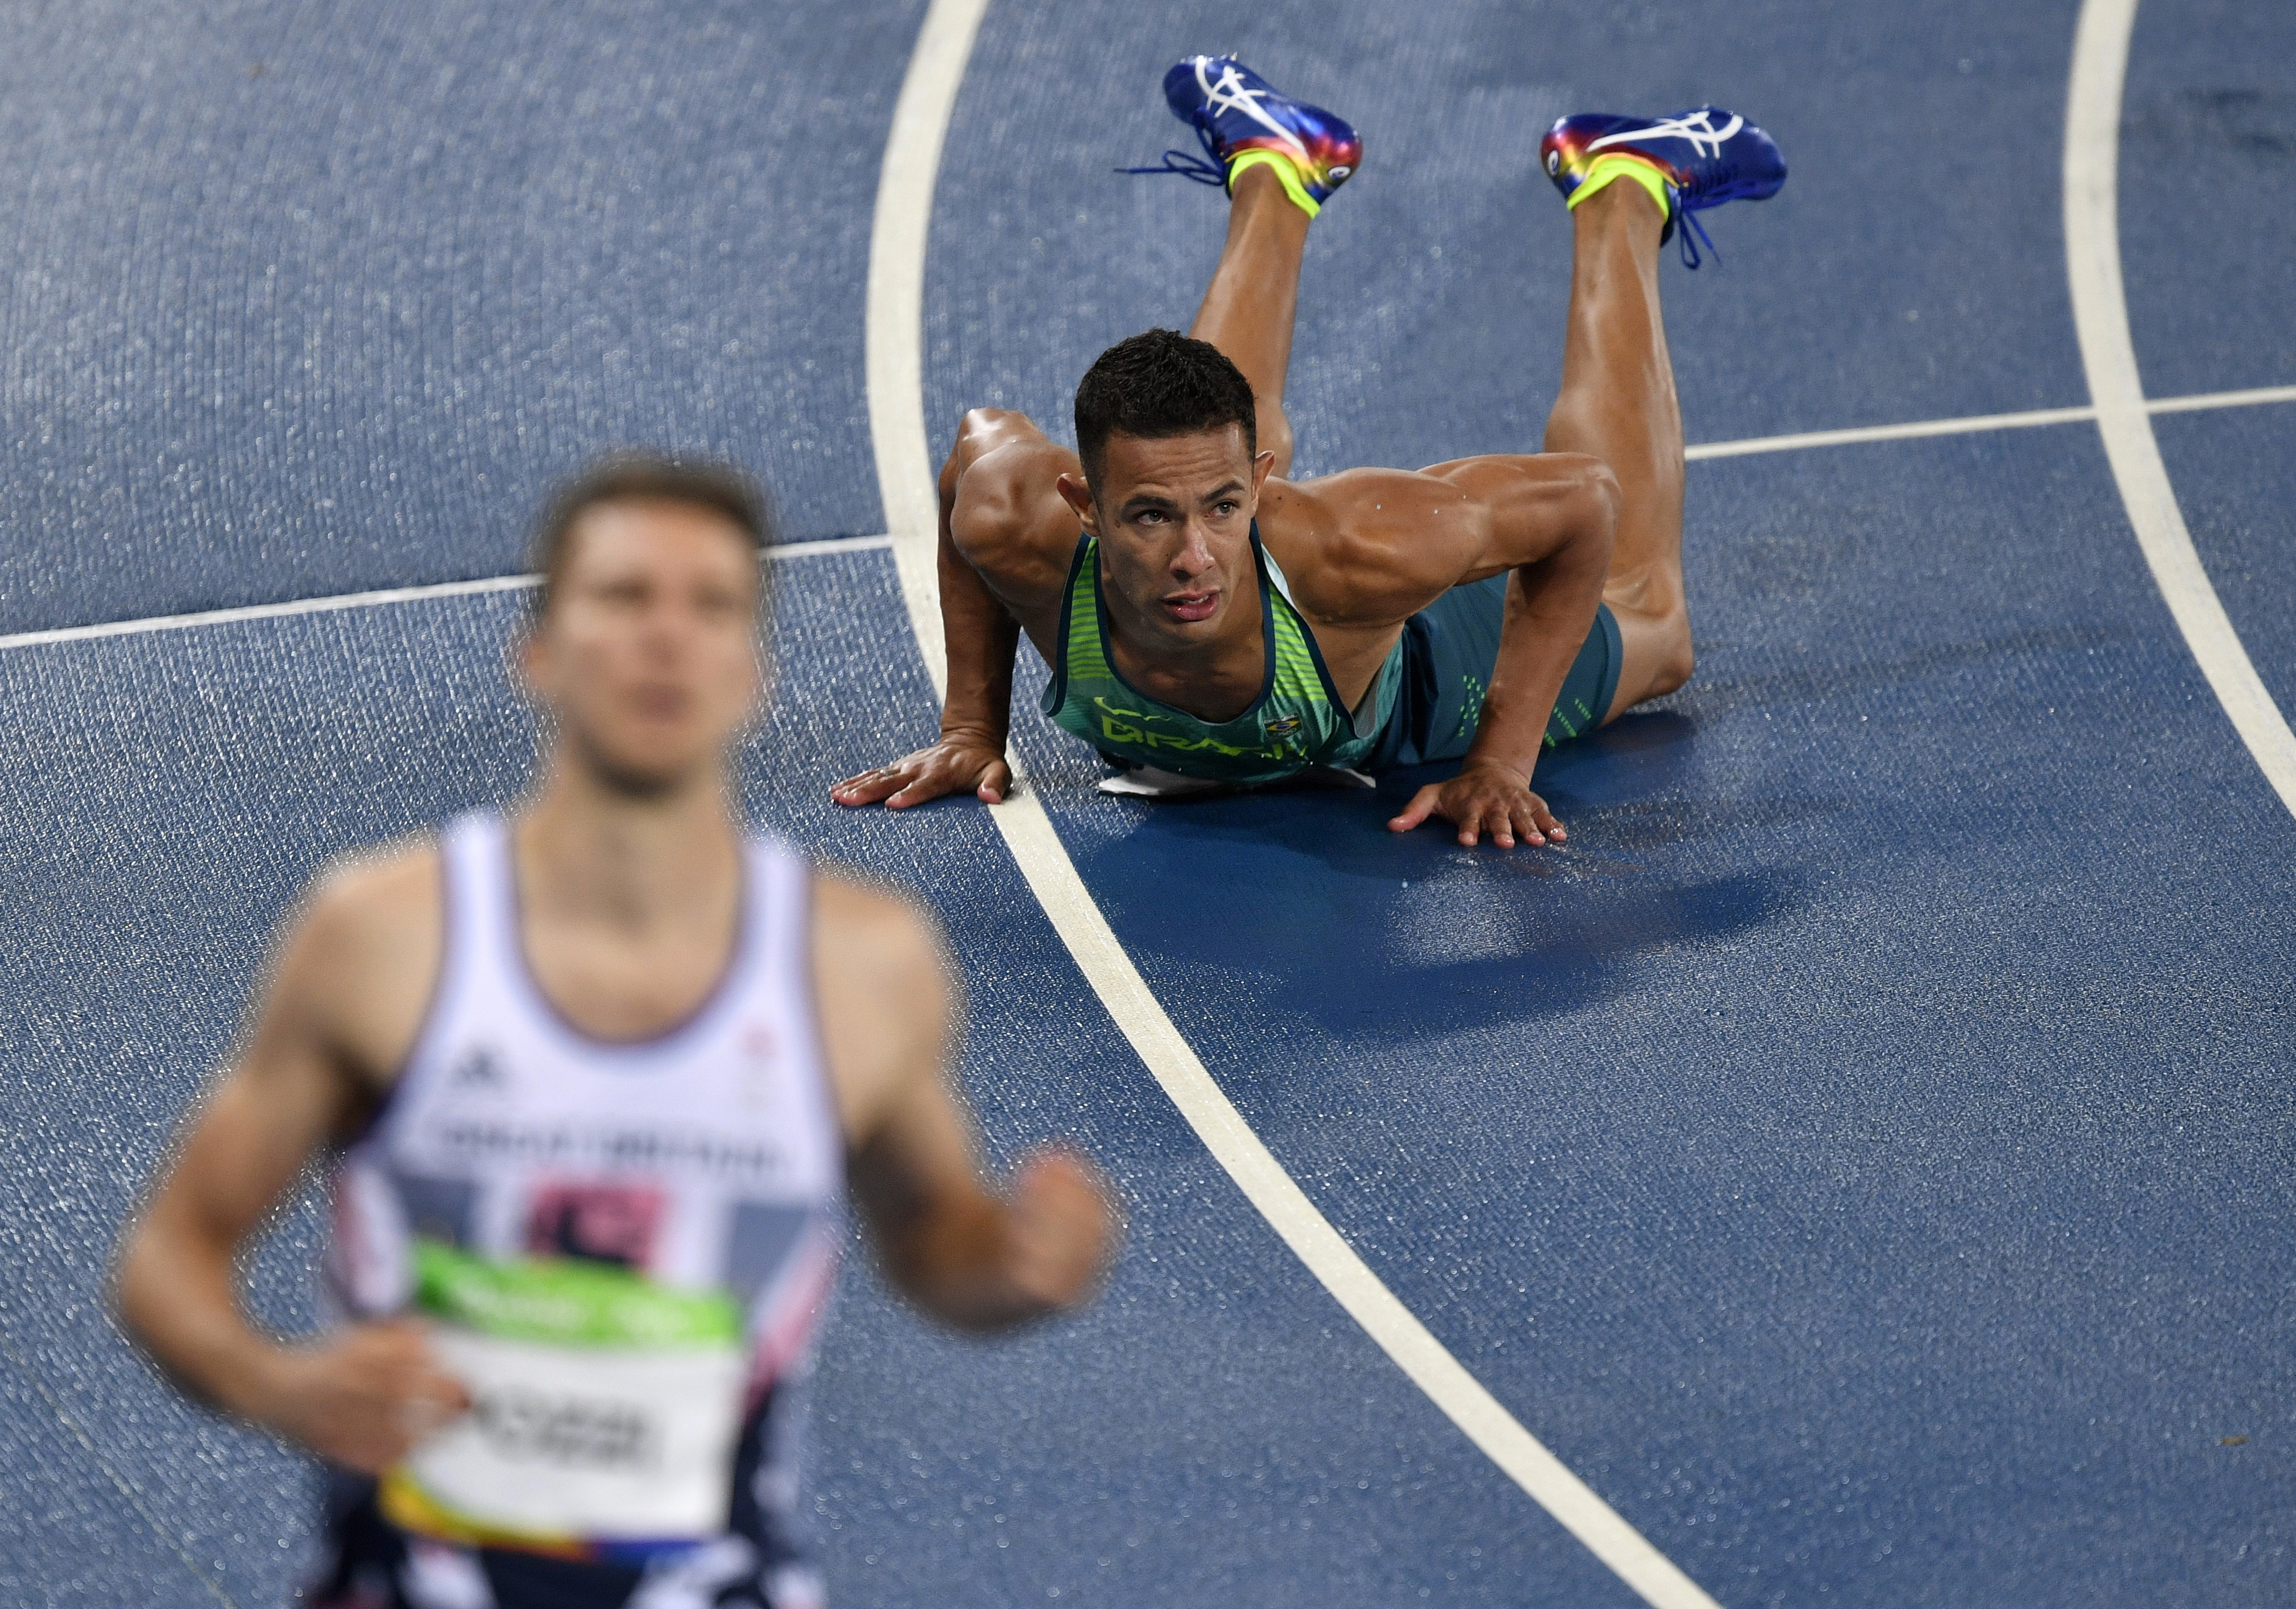 Britain's Andrew Pozzi and Brazil's Joao Vitor De Oliveira, right, compete in a men's 110-meter hurdles heat during the athletics competitions of the 2016 Summer Olympics at the Olympic stadium in Rio de Janeiro, Brazil, Monday, Aug. 15, 2016. (AP Photo/Martin Meissner) (Martin Meissner—AP)